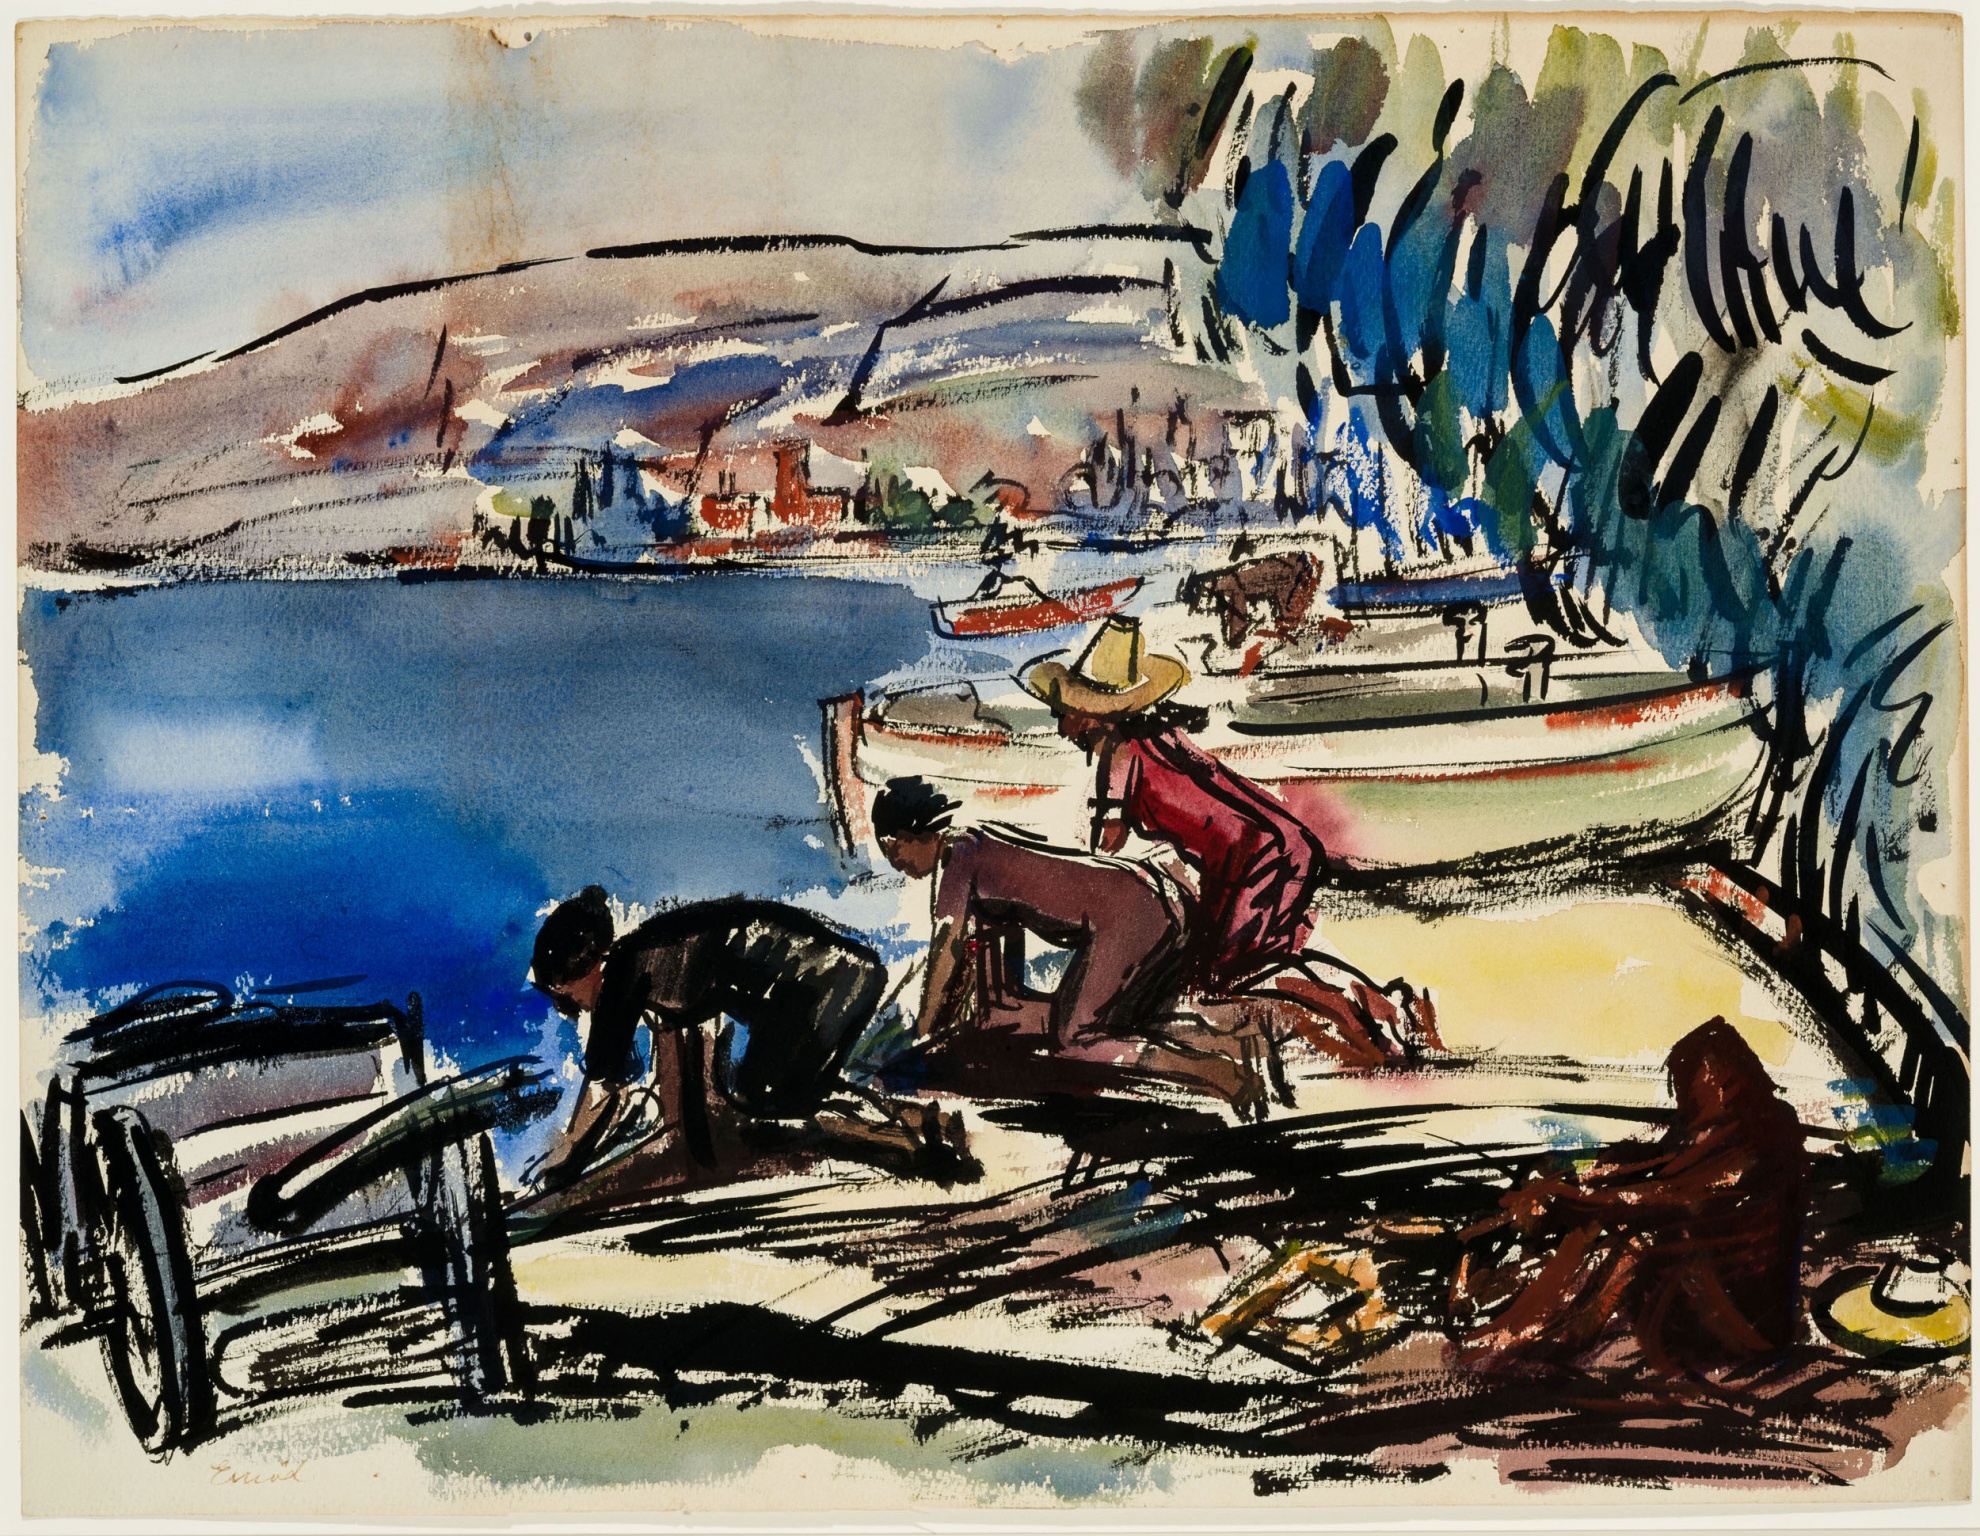 untitled (known as “Seaside Bay with Figures”)

(The Salgo Trust for Education CC BY-NC-SA)